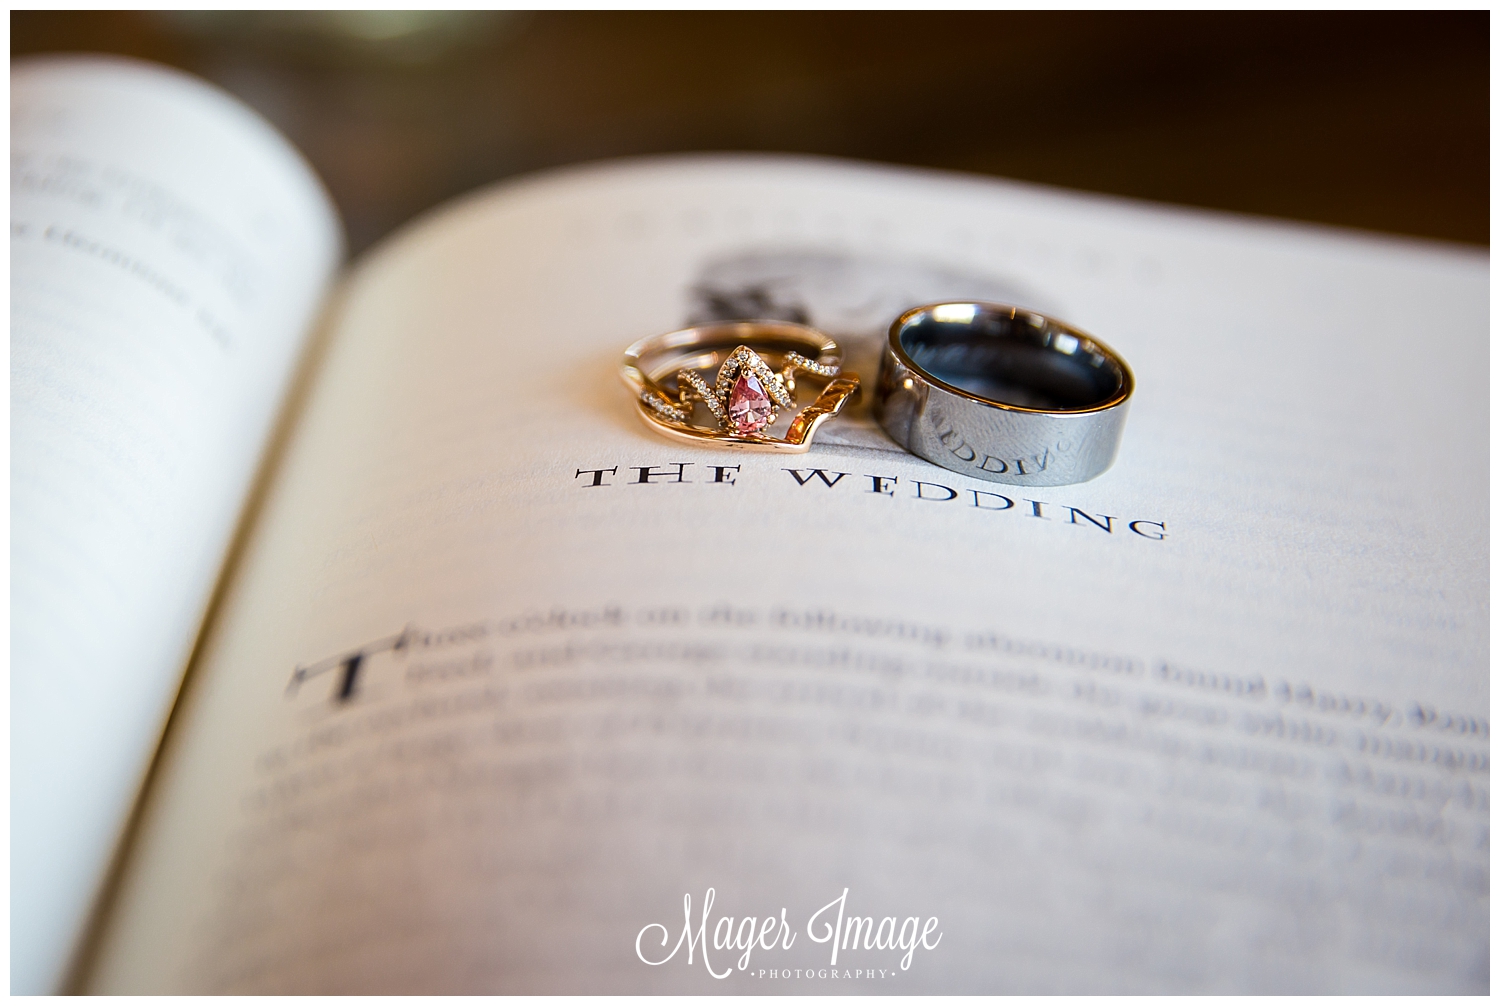 harry potter ring shot book the wedding chapter